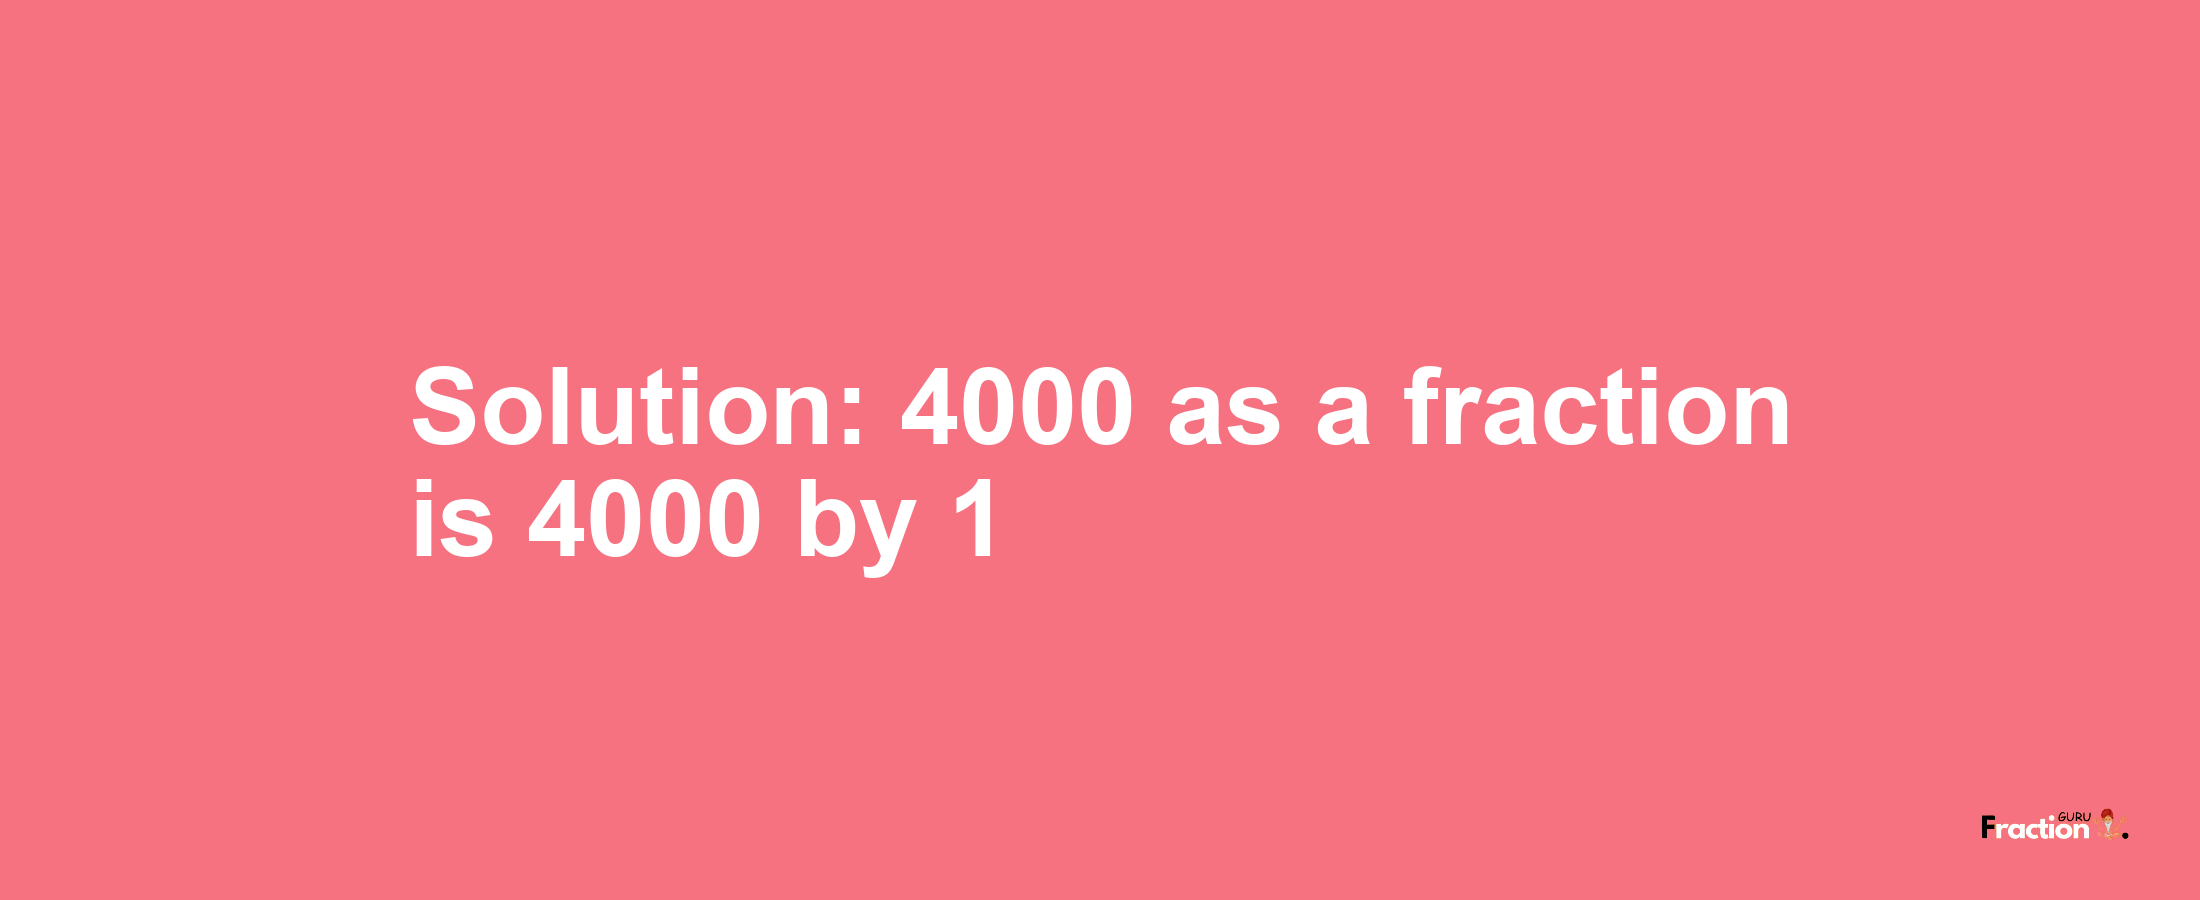 Solution:4000 as a fraction is 4000/1